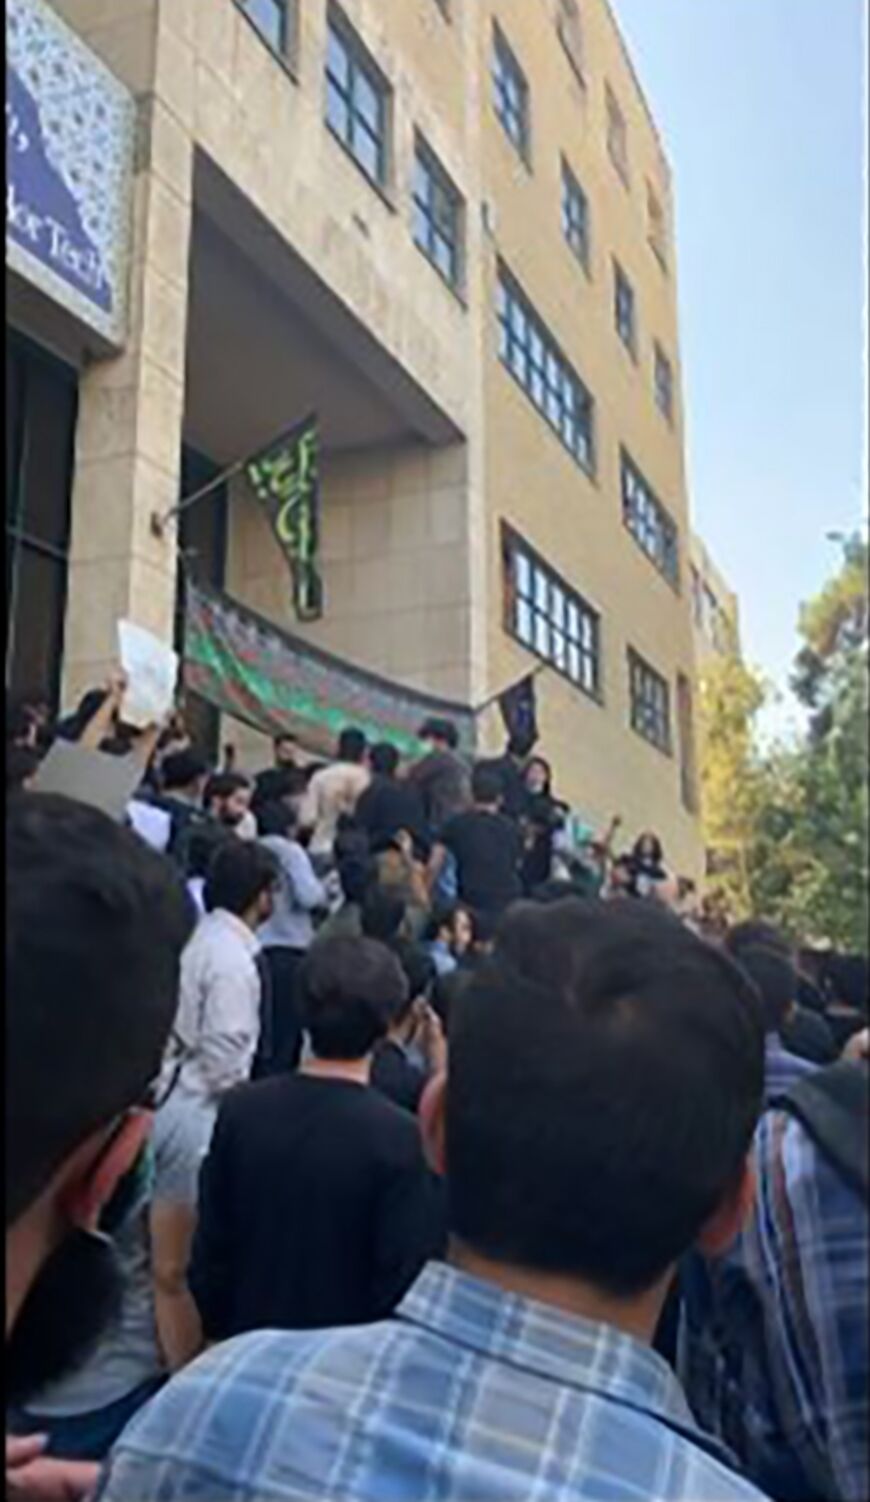 Students of the Amirkabir University of Technology (Tehran Polytechnic) clash with plain clothes security forces during a protest in Iran's capital Tehran on September 19